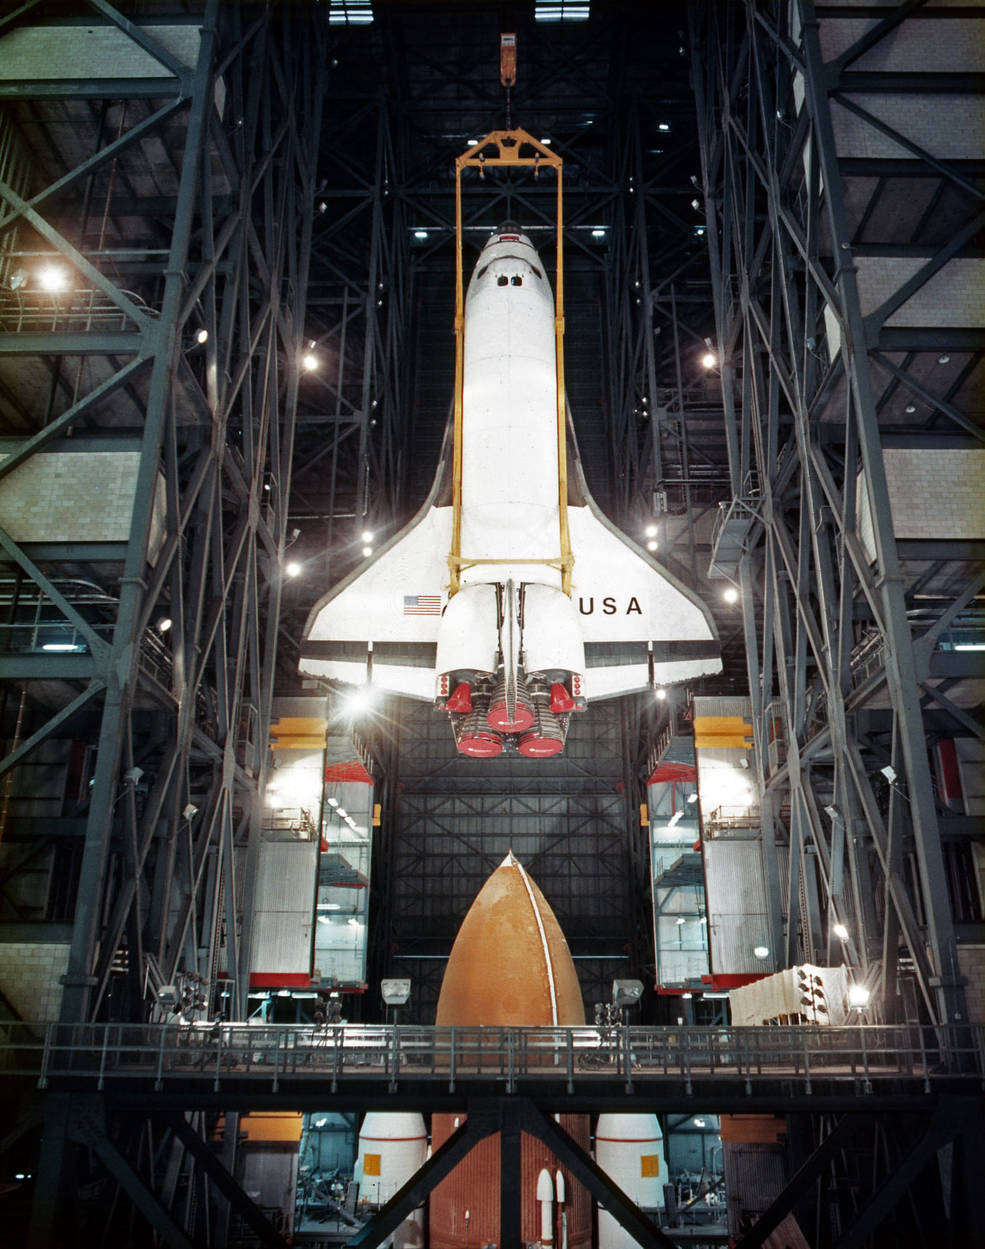 NASA's Johnson Space Center on X: "📸: Preparing space shuttle Columbia for its final mission in the Orbital Flight Test program – STS-4 in 1982. #OTD 40 years ago in @NASAhistory: https://t.co/Z4OC6jXrXQ.